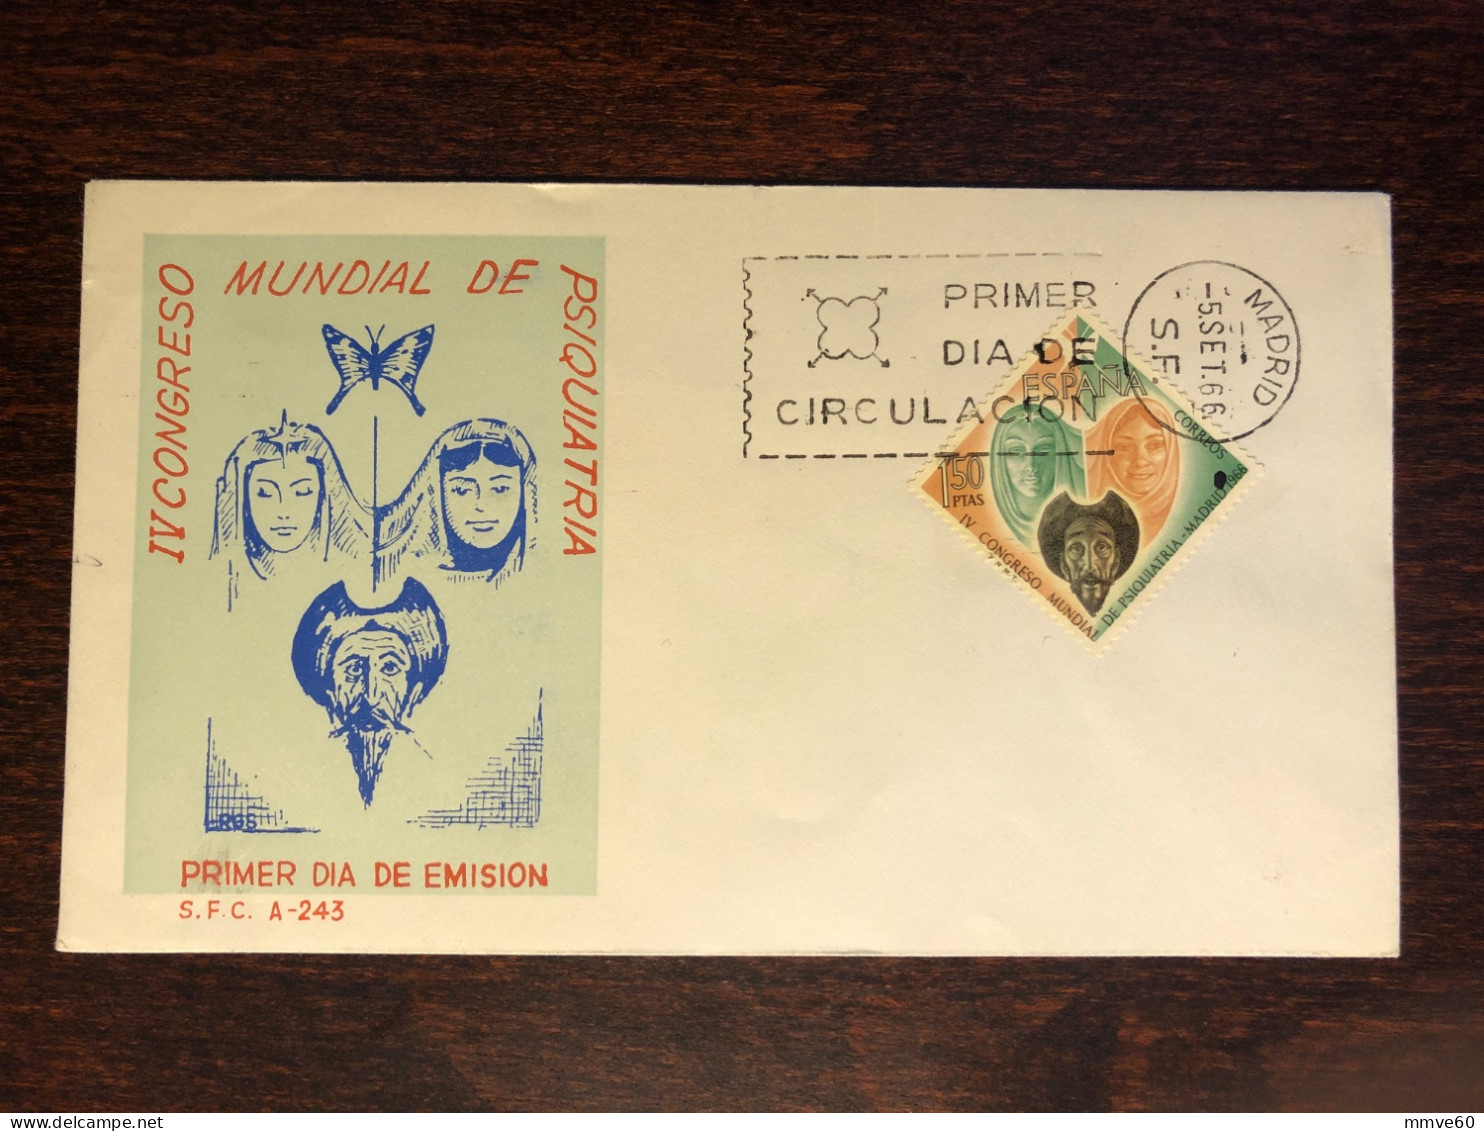 SPAIN FDC COVER 1966 YEAR PSYCHIATRY MENTAL HEALTH MEDICINE STAMPS - FDC